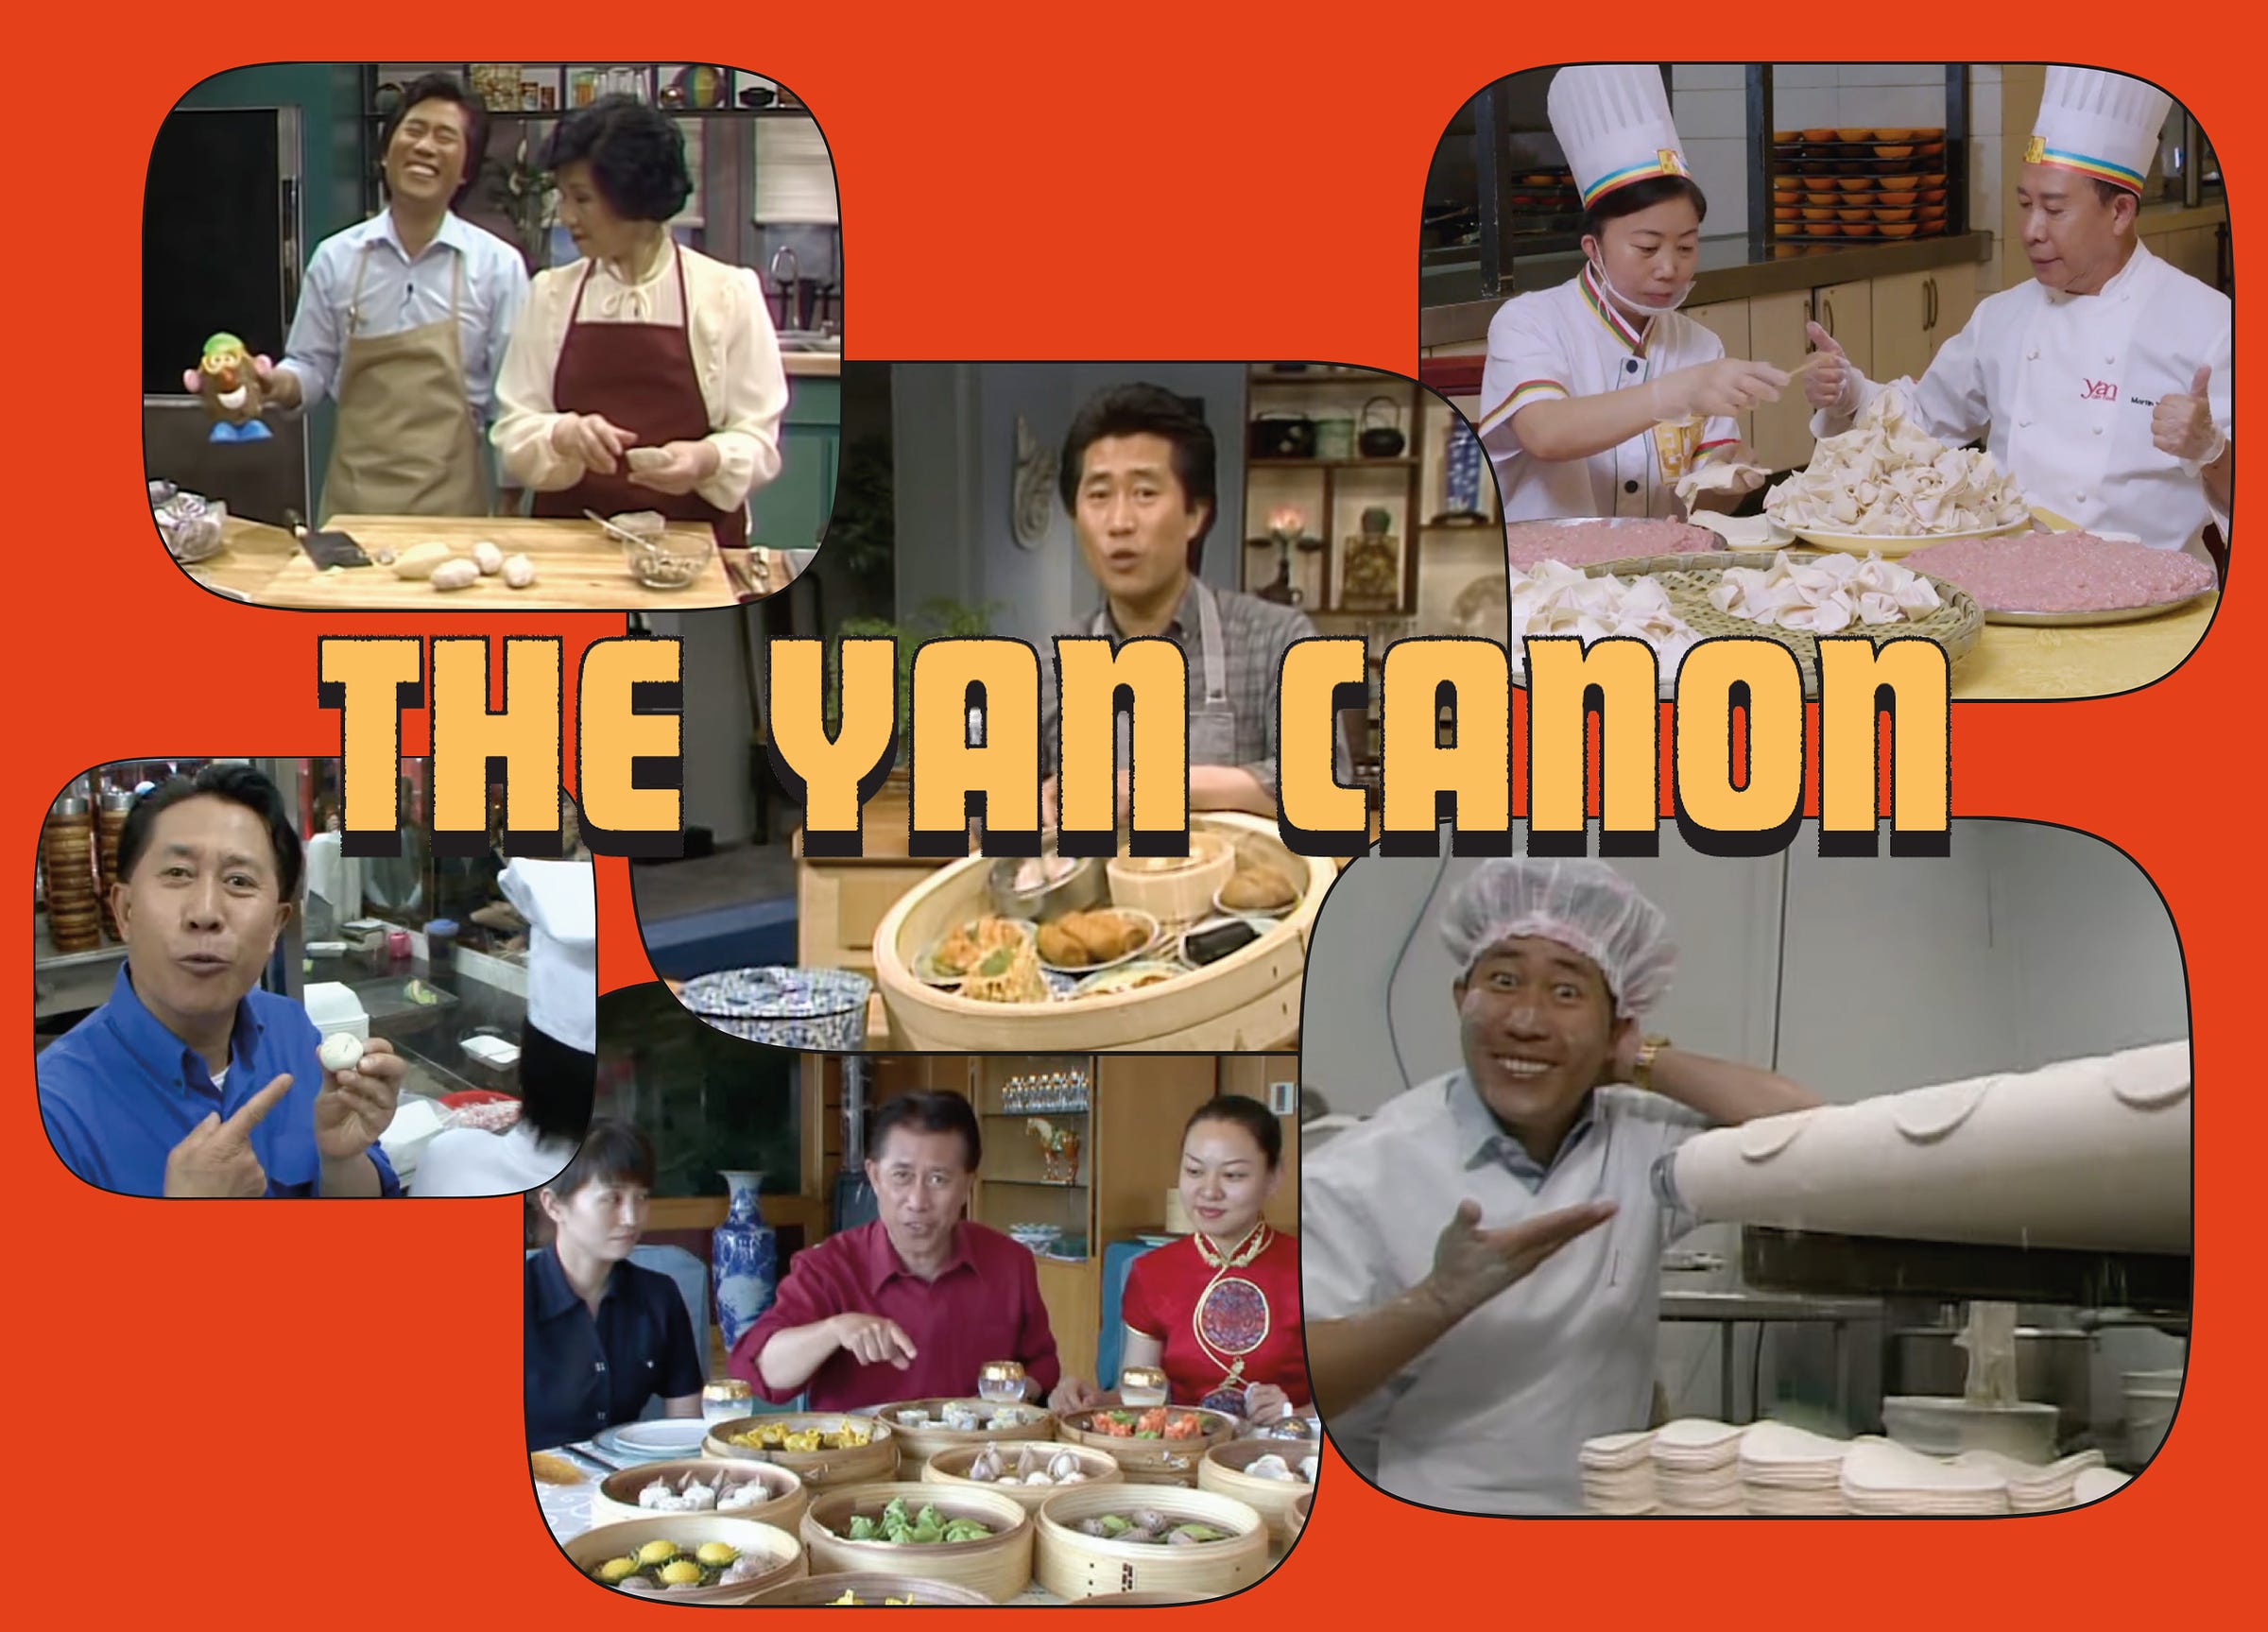 Still captures from the episodes of Yan Can Cook that are included in the playlist linked in the caption; they represent Martin Yan across multiple eras and television shows